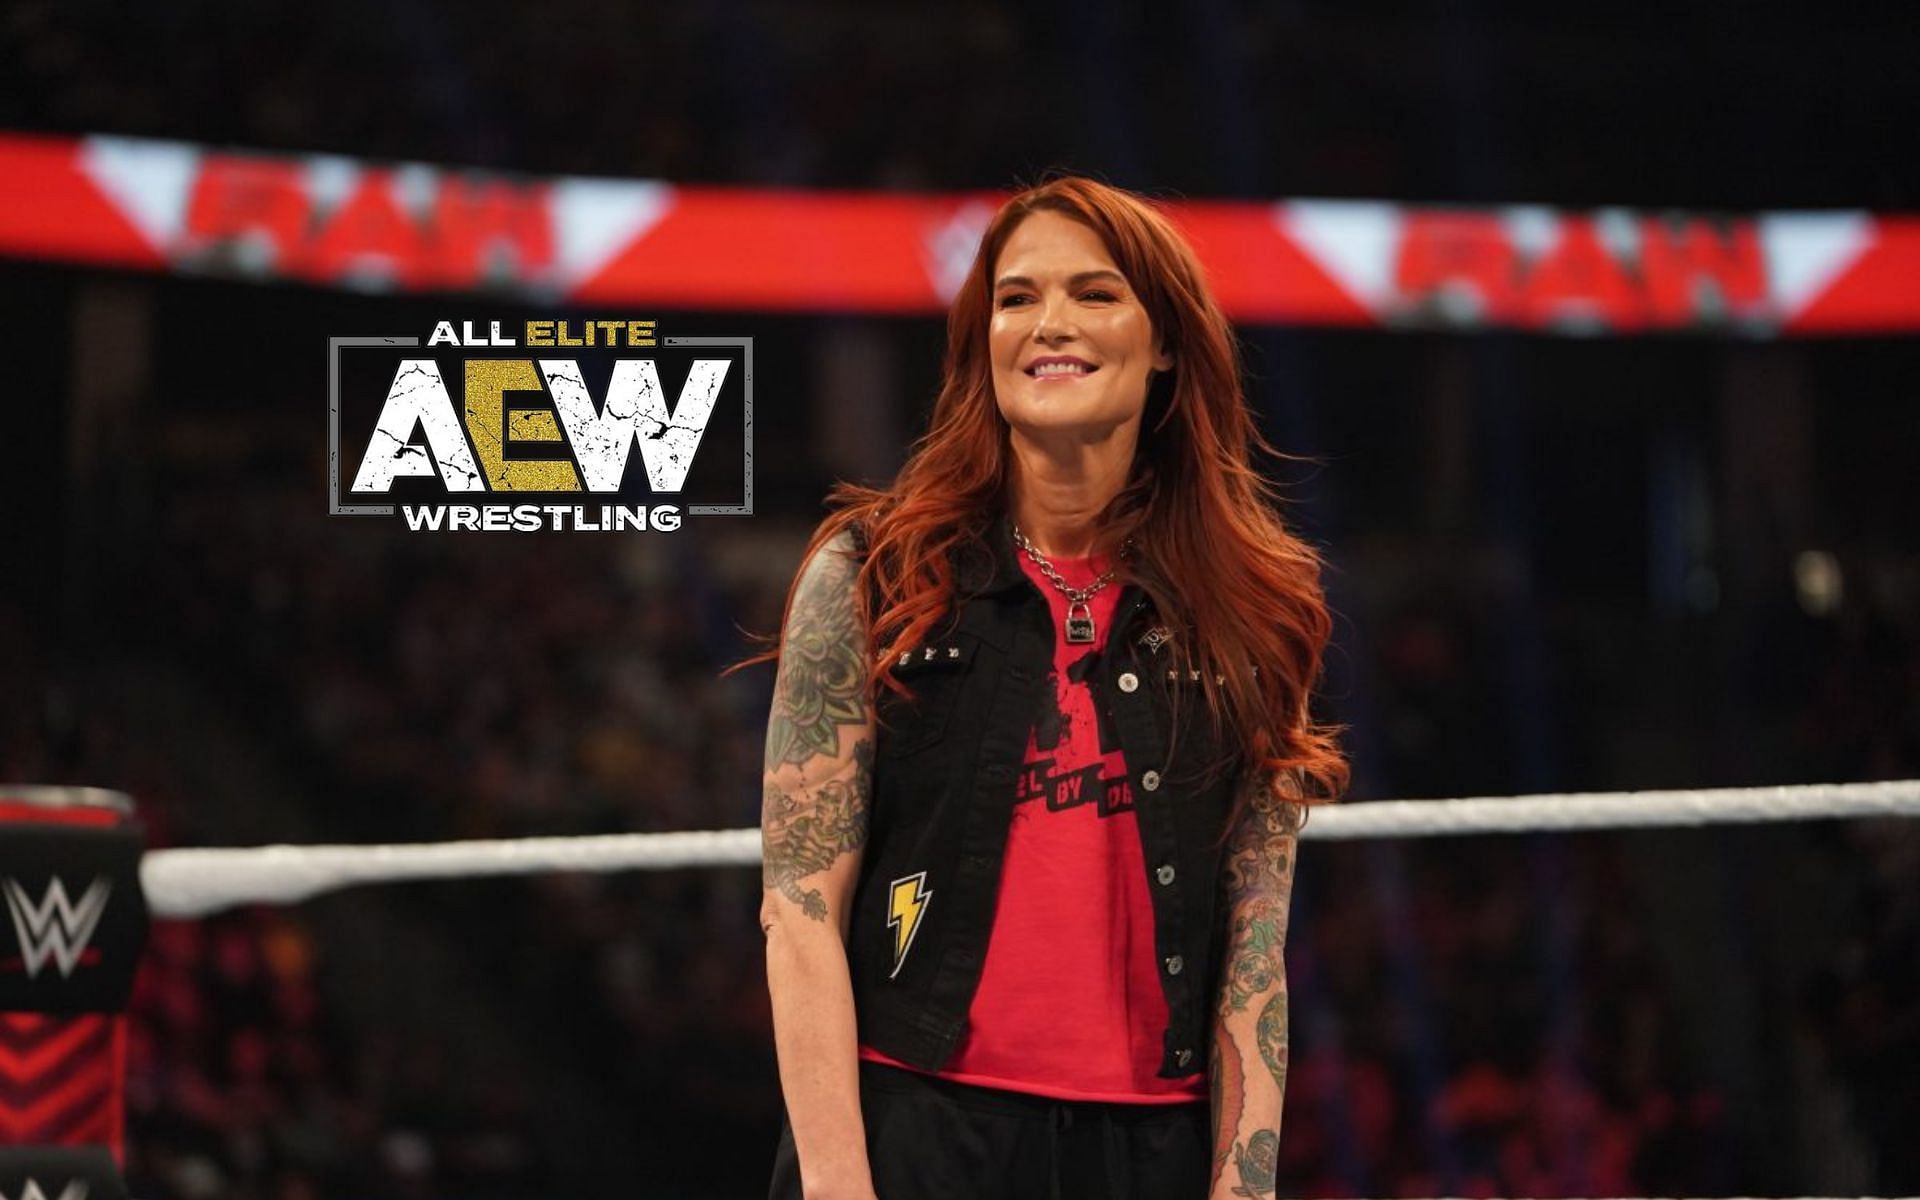 WWE Hall of Famer Lita recently commended this AEW talent.